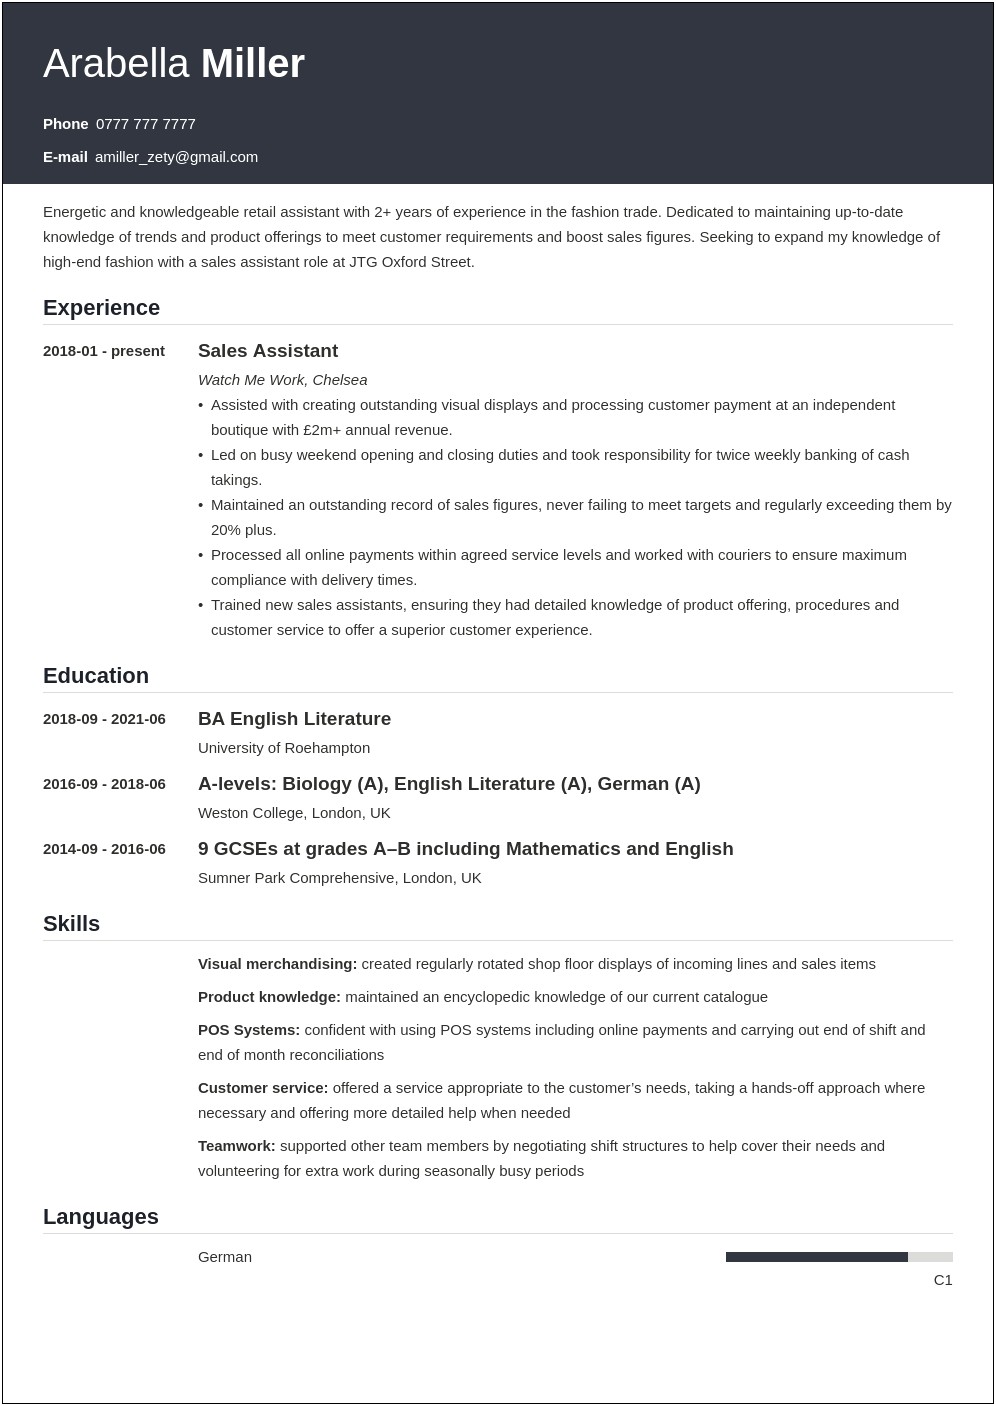 Sample Of Education Section On Resume